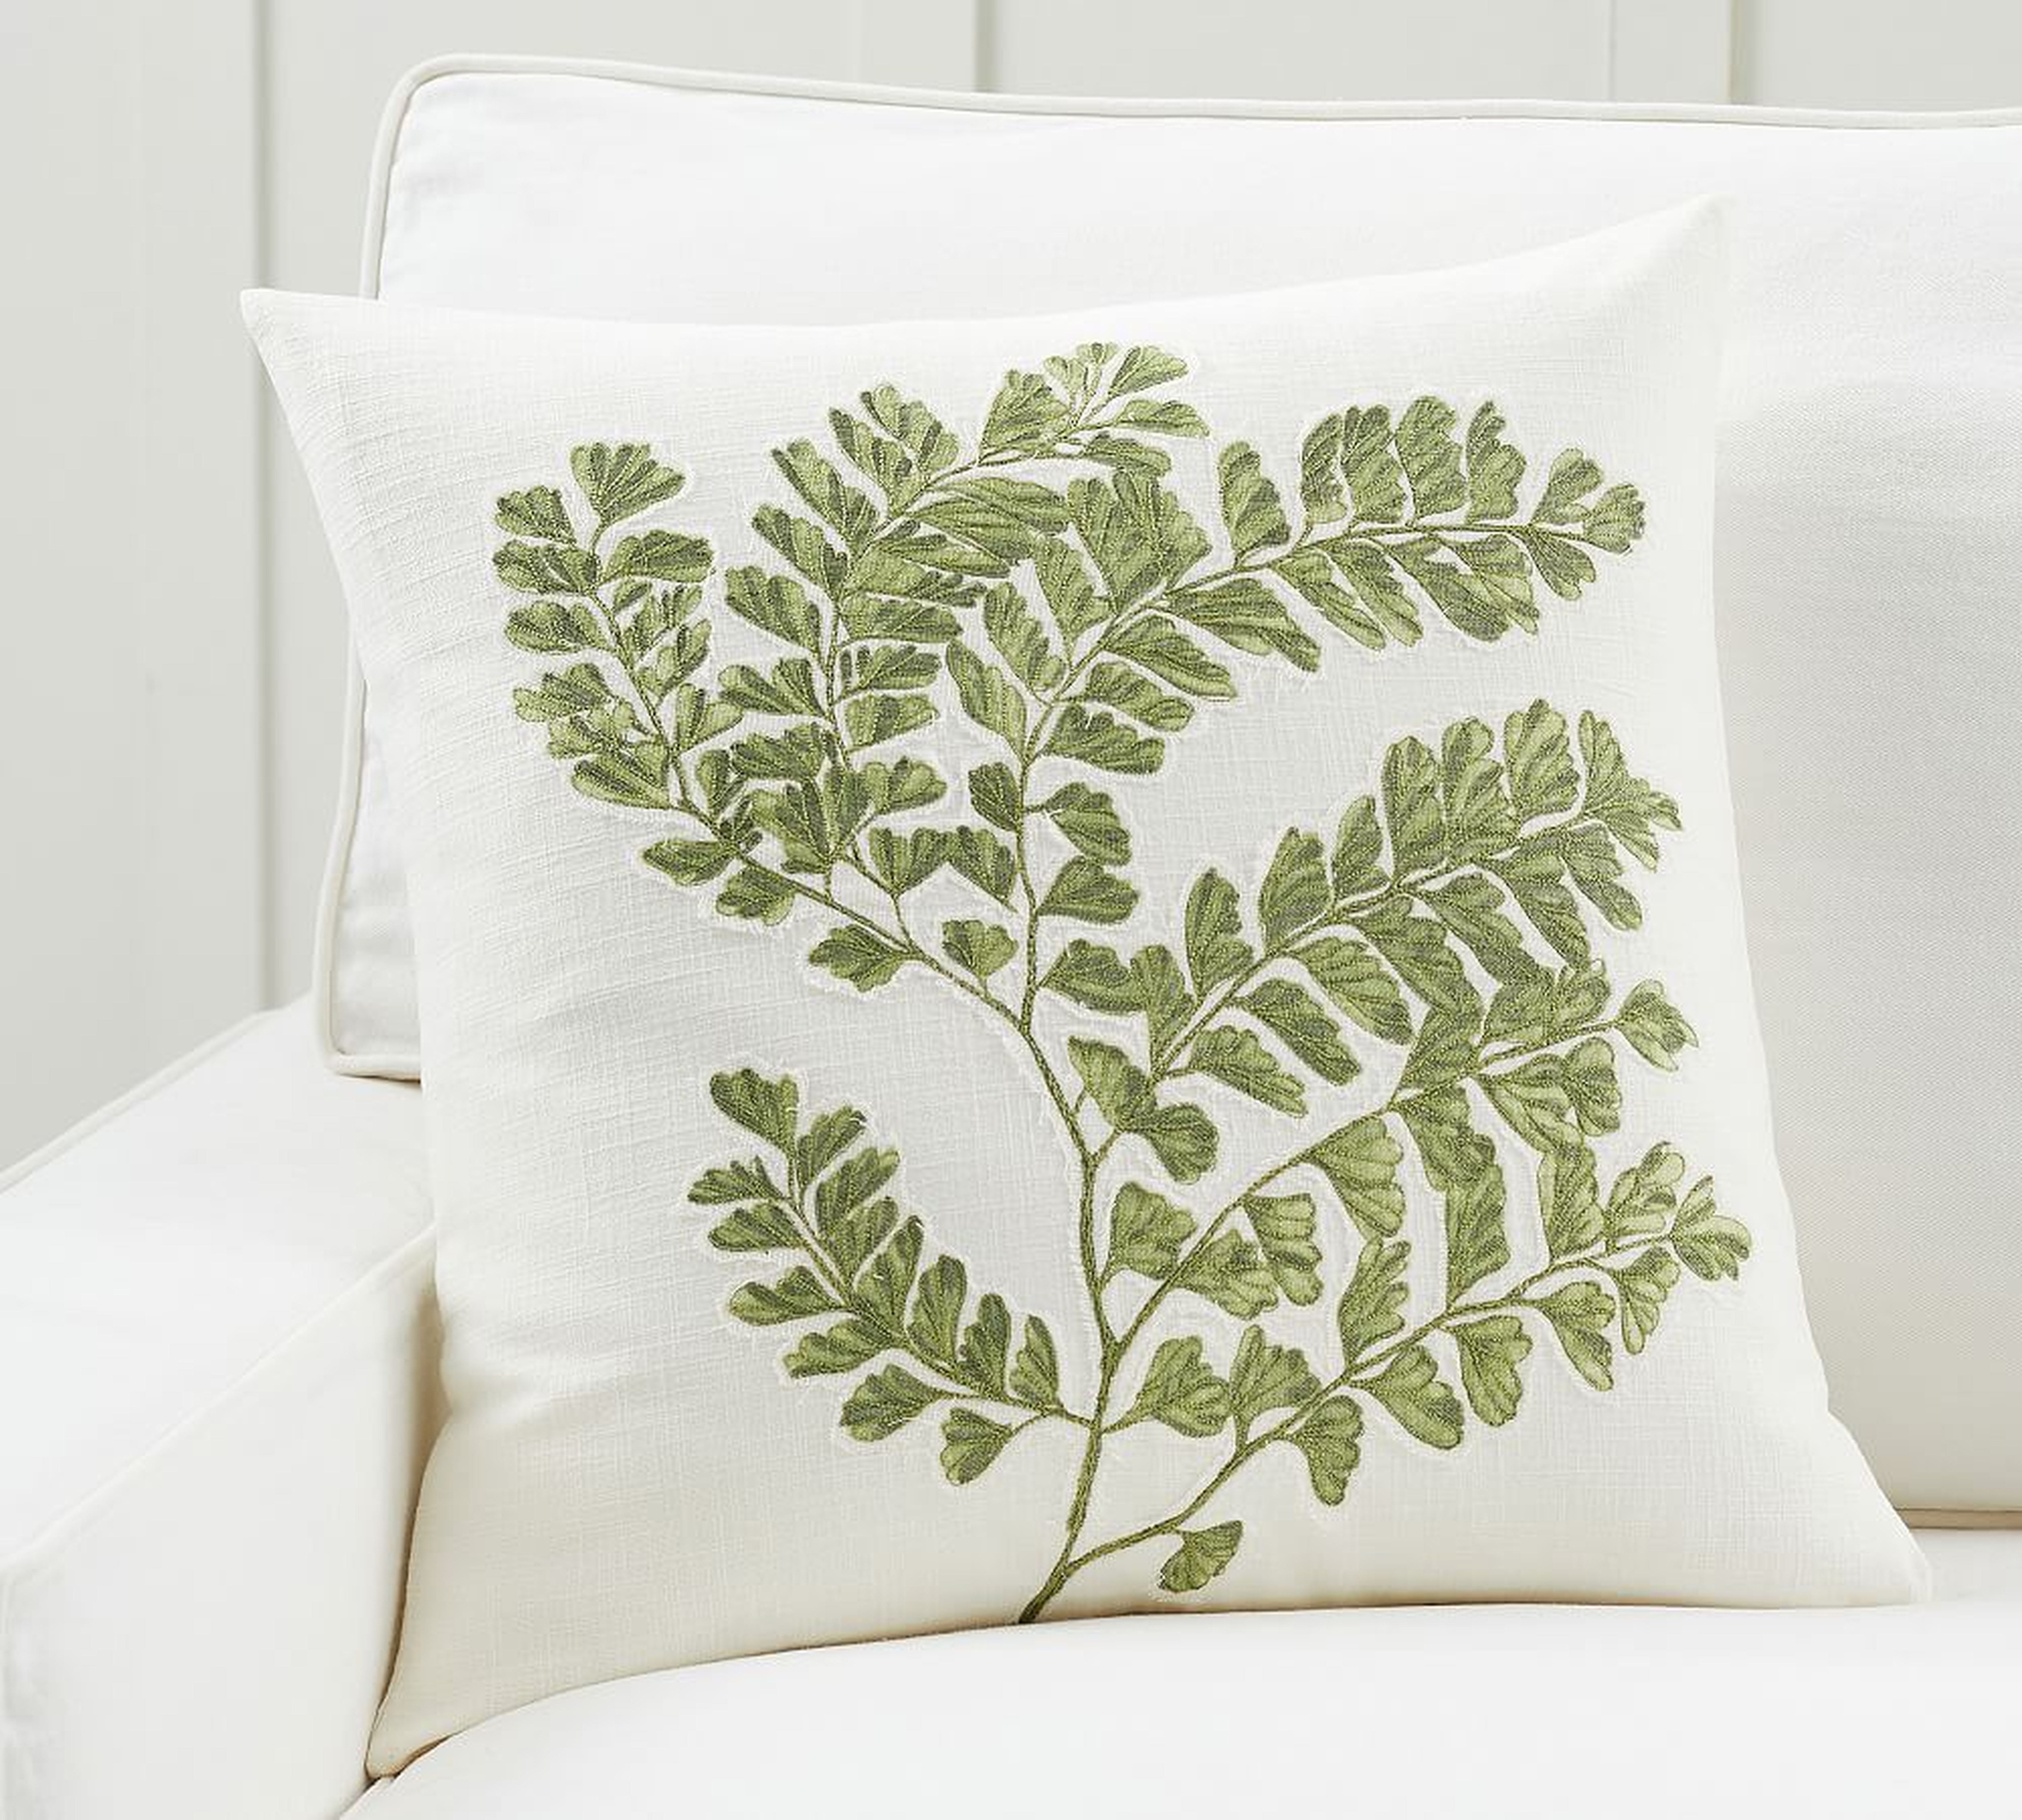 Fern Embroidered Pillow Cover, 20 x 20", Green Multi - Pottery Barn